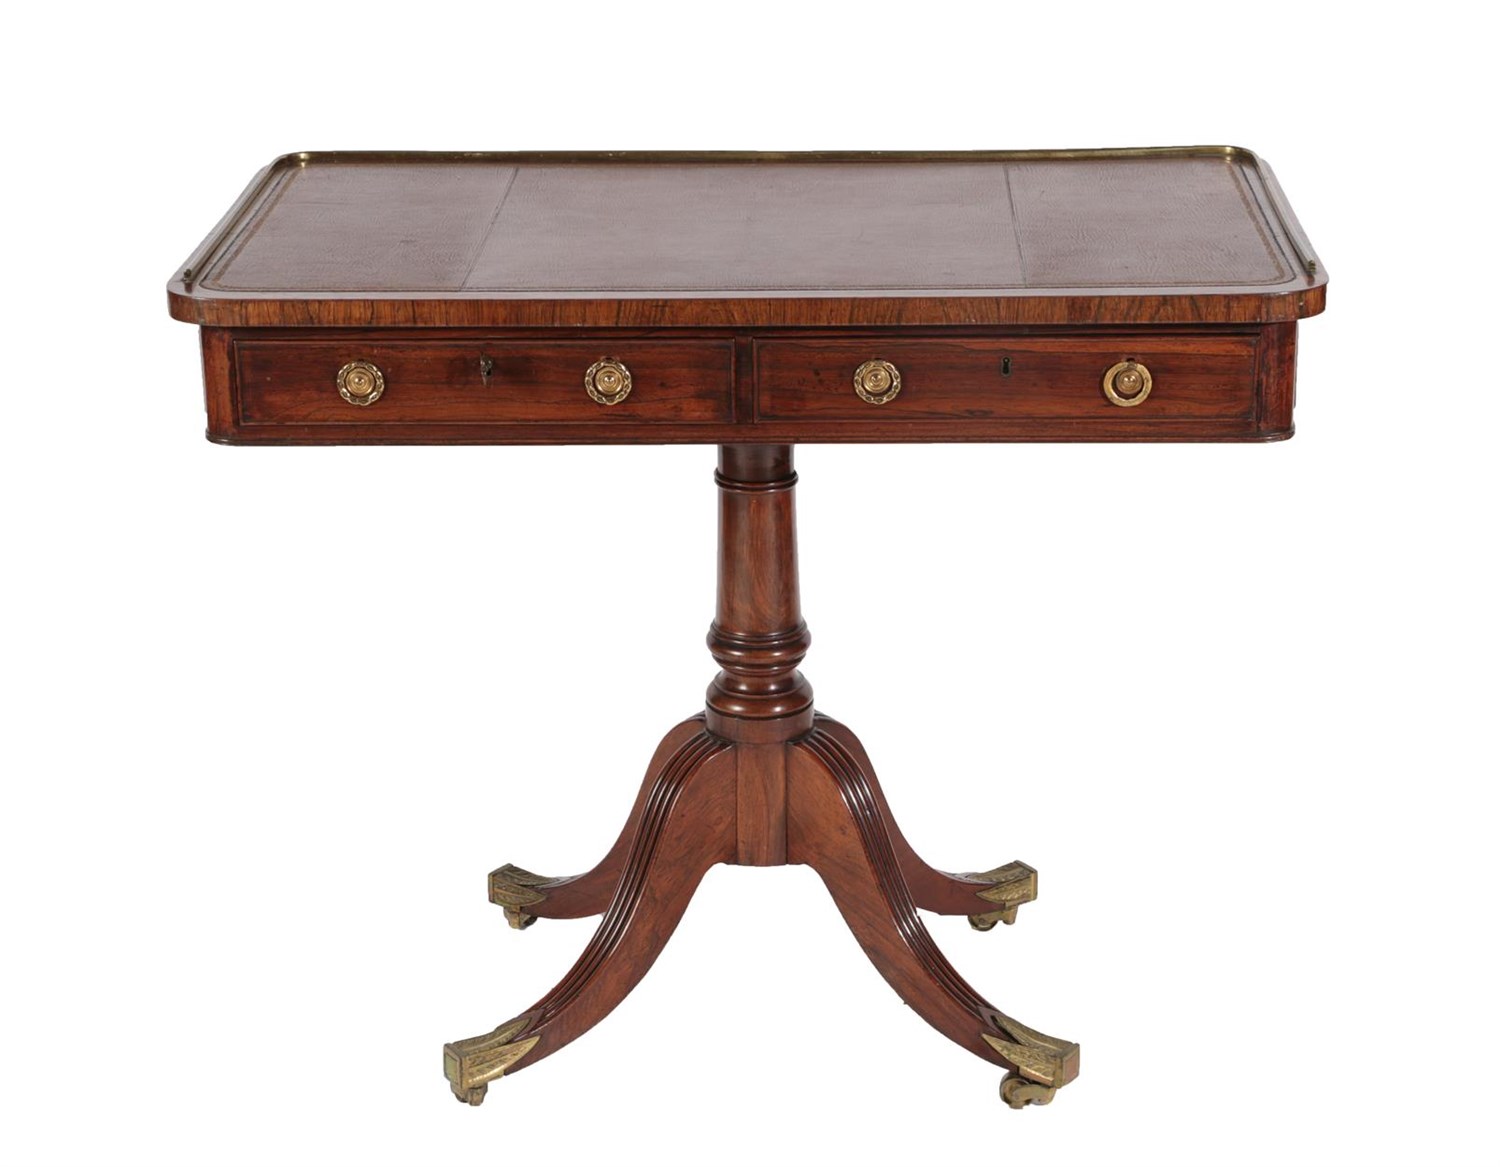 Lot 514 - A Regency Rosewood Pedestal Writing Table, early 19th century, with three-quarter brass rail...